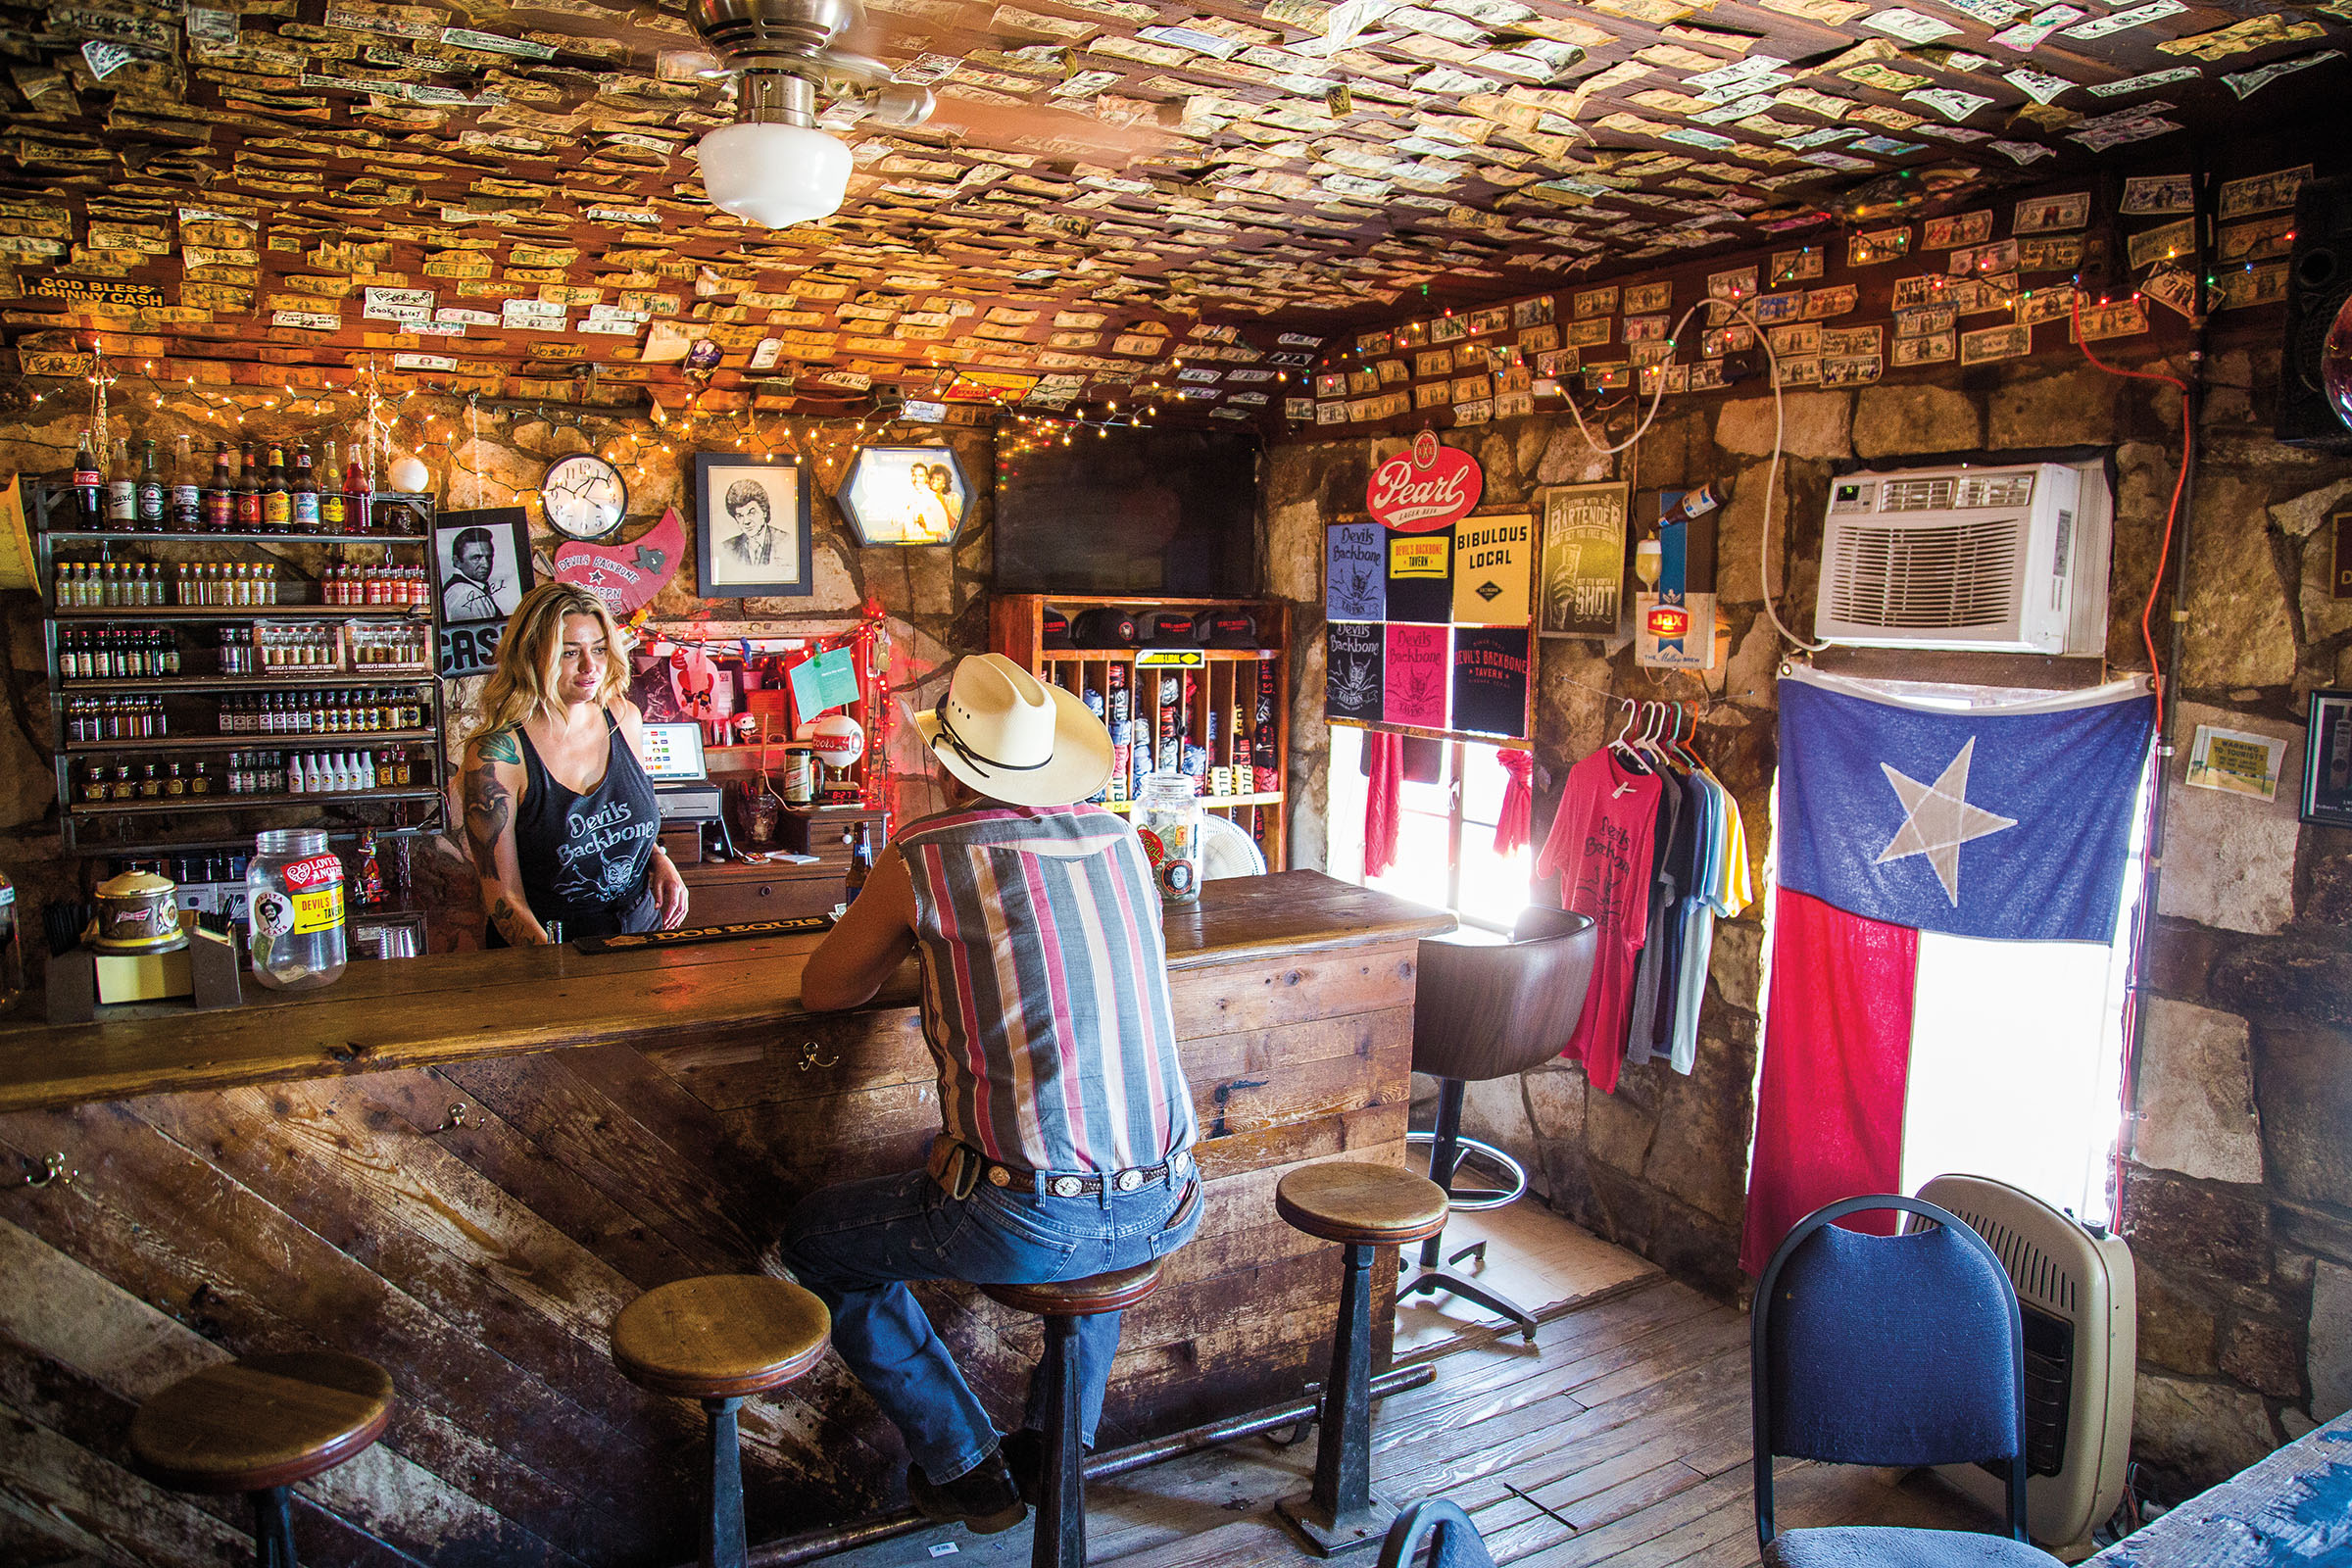 A man in a cowboy hat sits at a heavily-decorated bar talking to a female bartender. A Texas flag covers the window, and dollar bills line the ceiling.